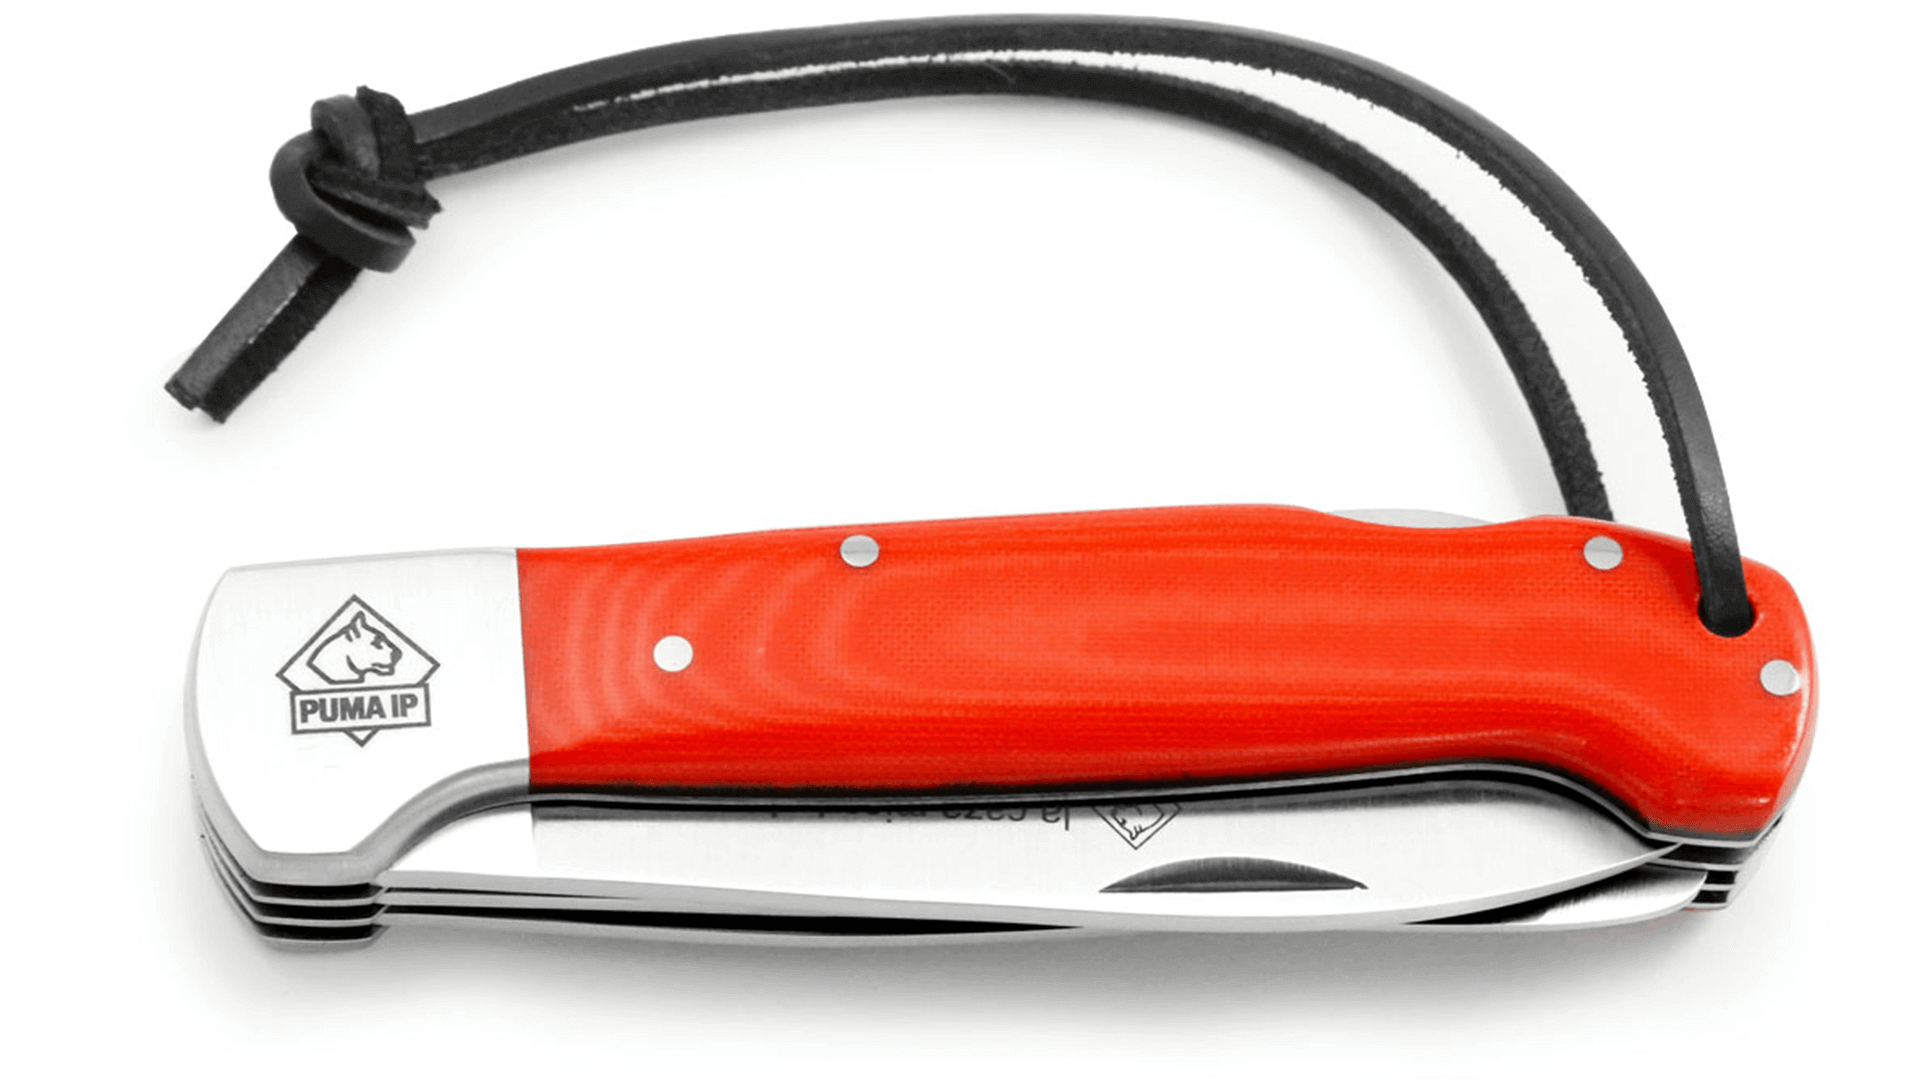 puma-ip-la-caza-micarta-1-from-solingen-klingestadt-with-pry-blade-folded-closed